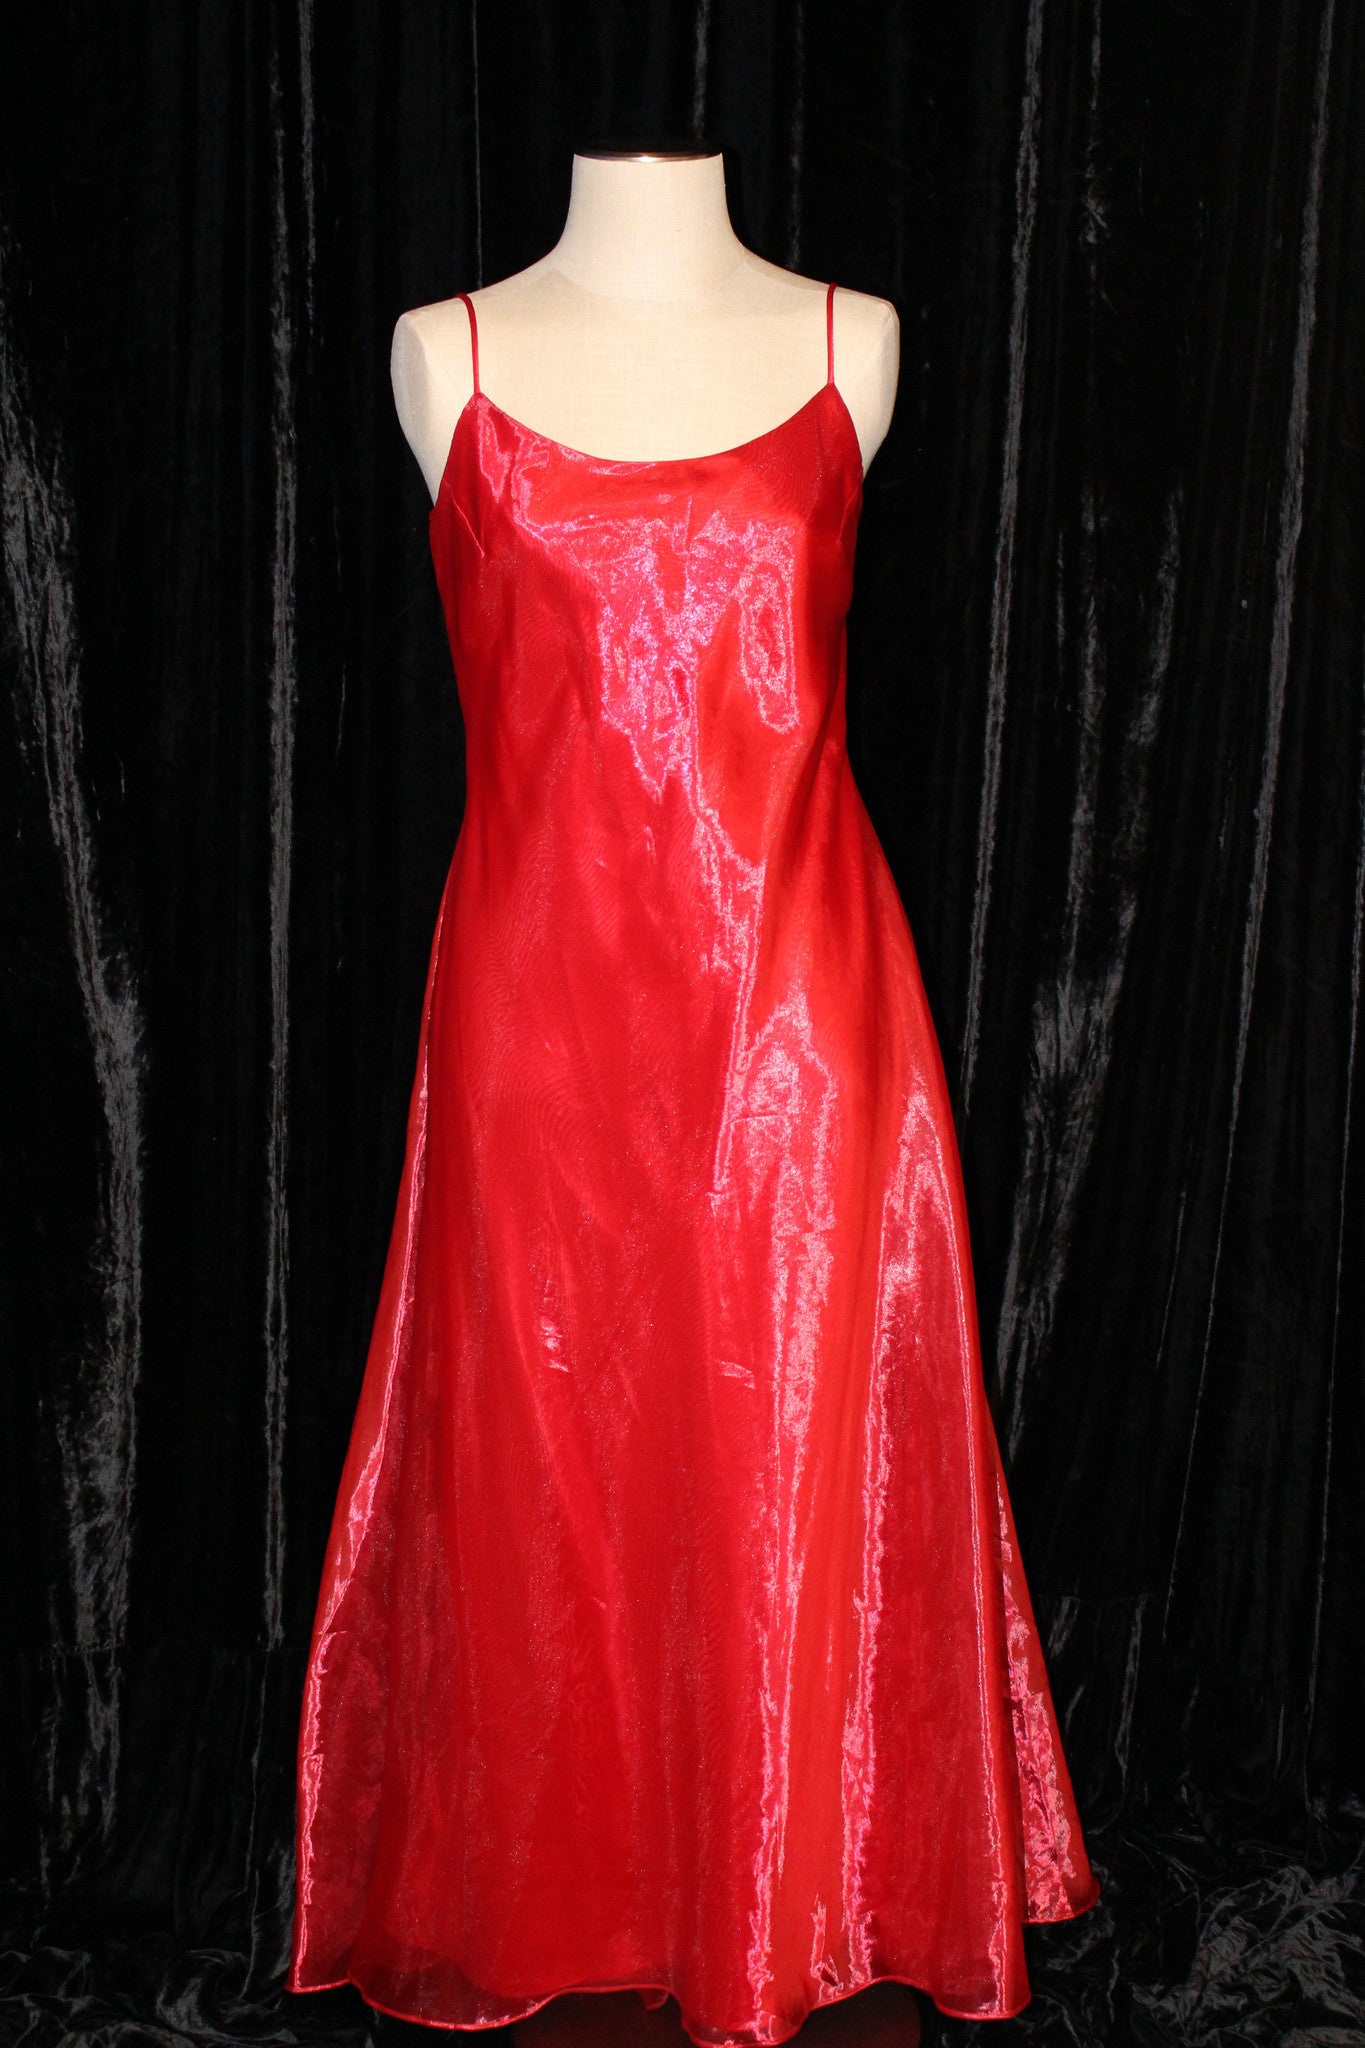 Red Iridescent "Jessica McClintock" Gown 301